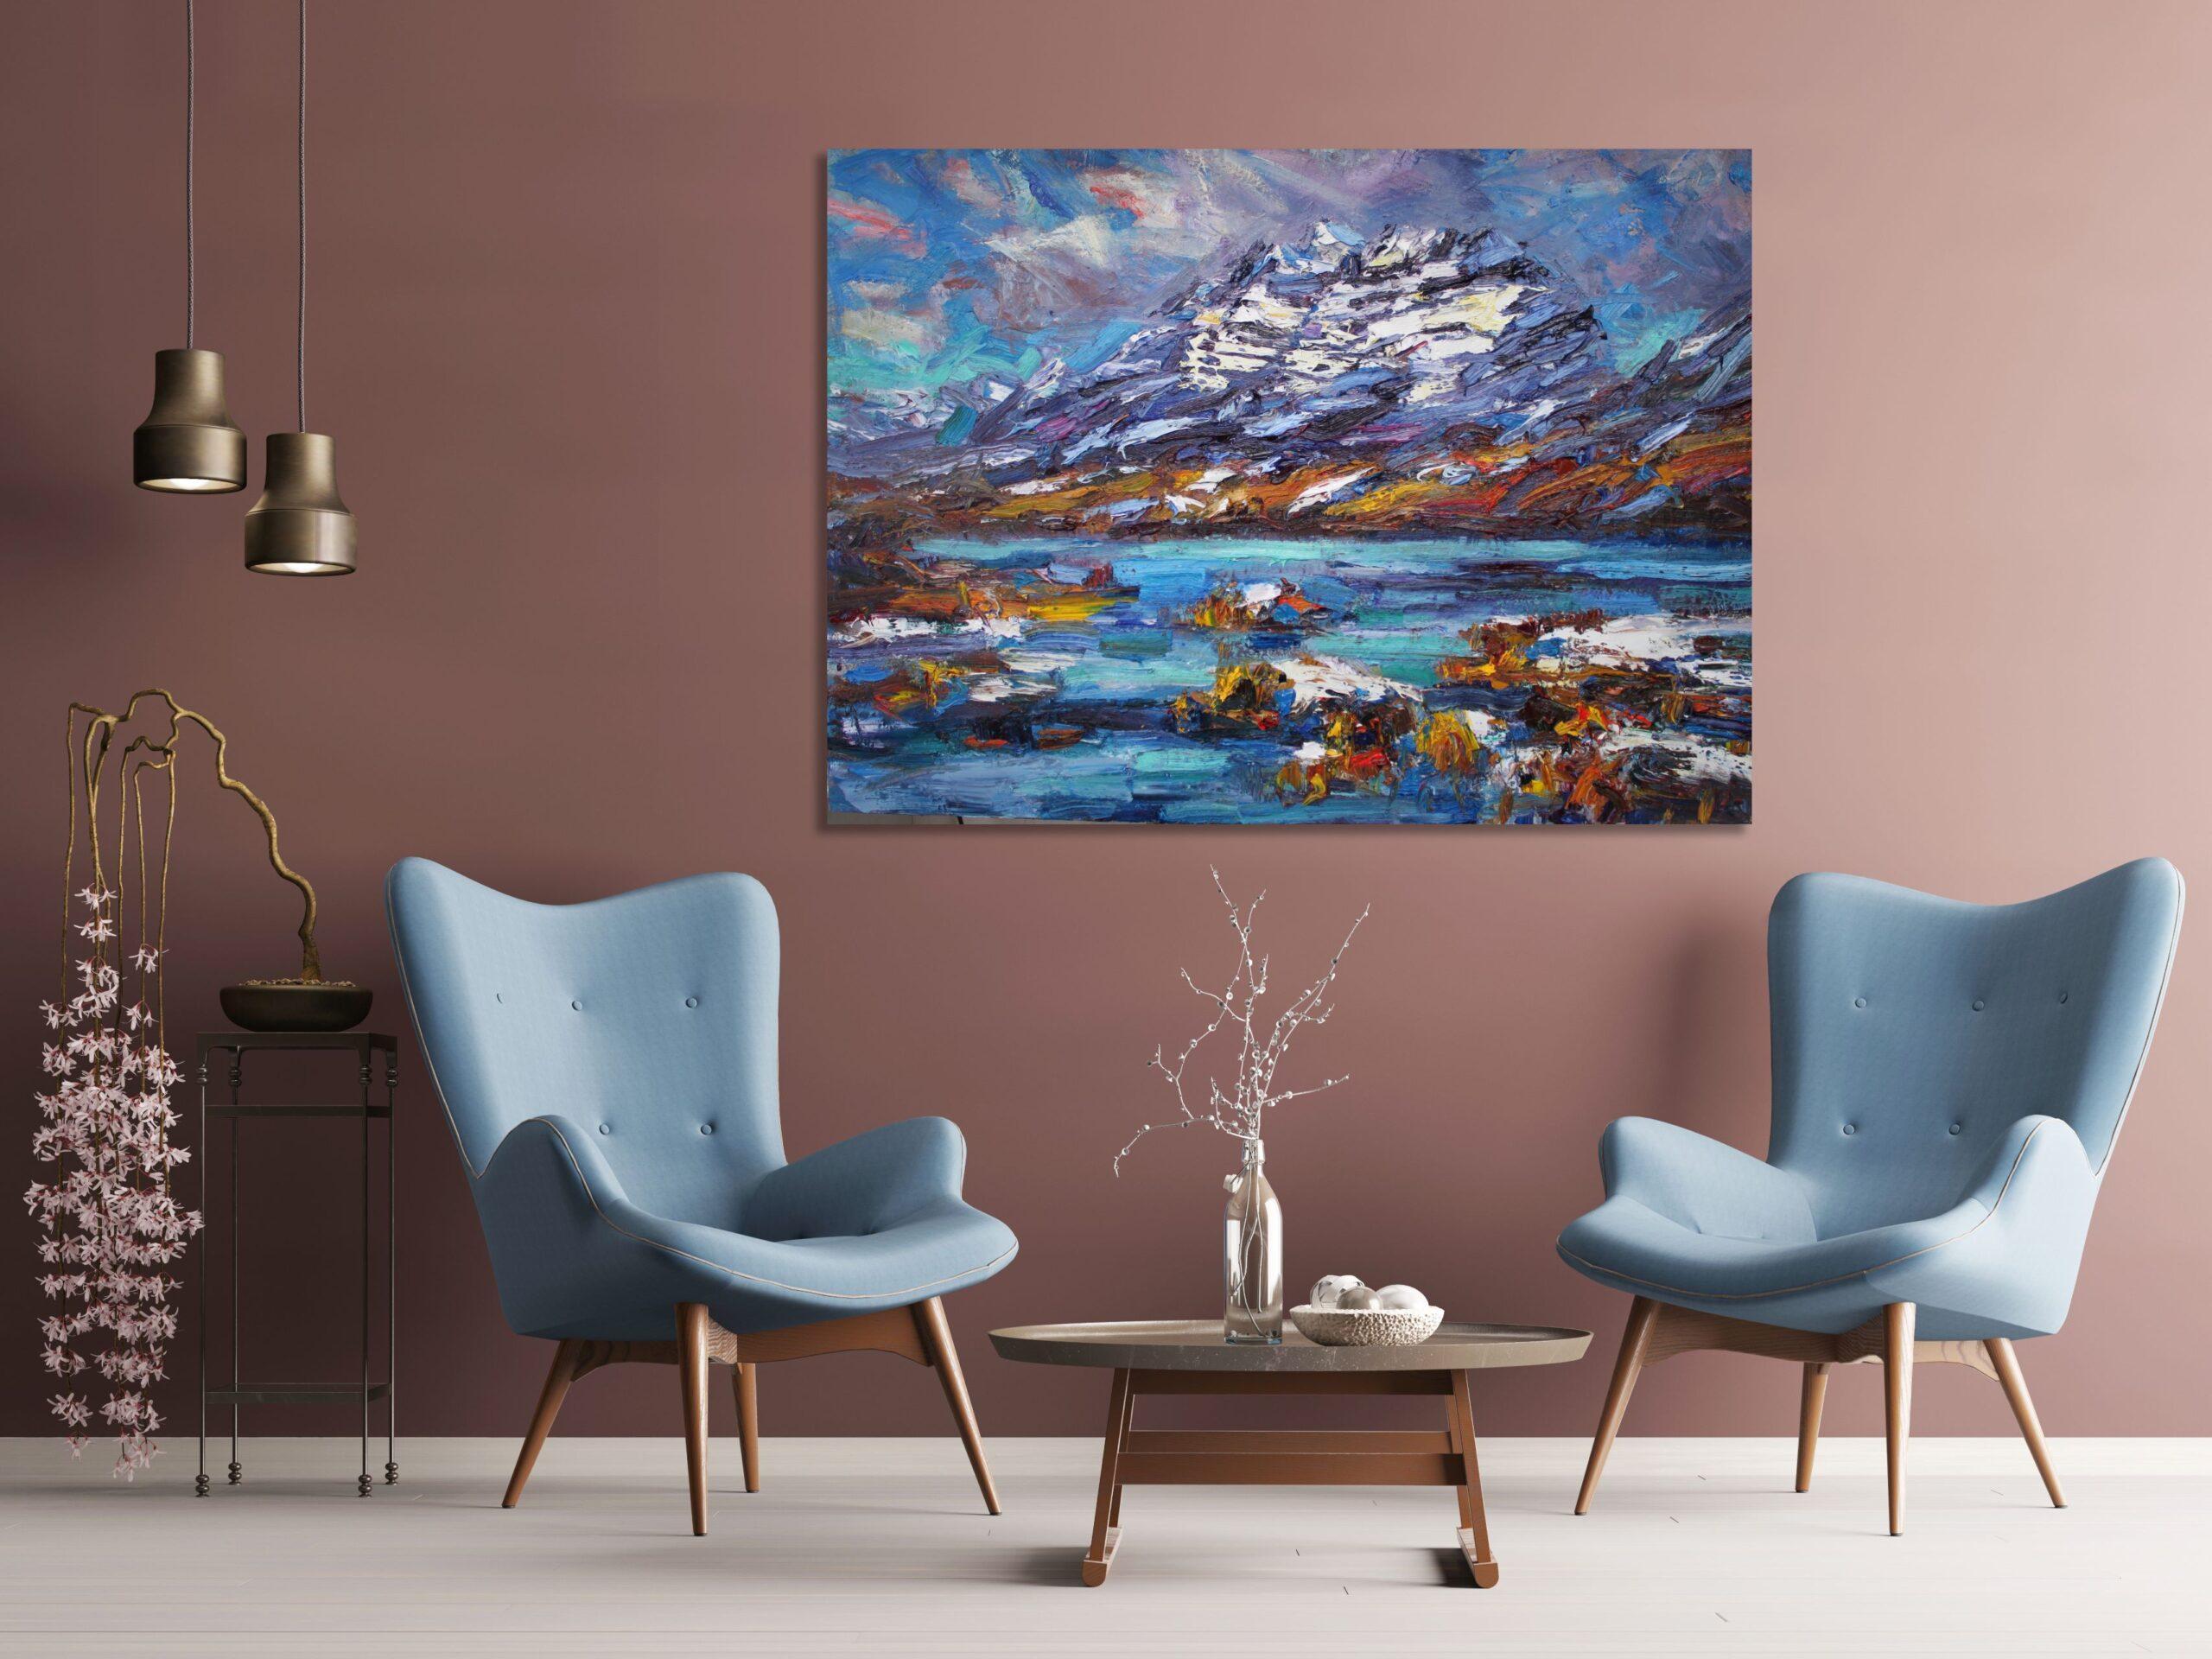 Liathach and Loch Clair is a unique oil on canvas painting by contemporary artist Jonathan Shearer, dimensions are 91 × 122 × 3.5 cm (35.8 × 48 × 1.4 in).
The artwork is signed, sold unframed and comes with a certificate of authenticity.

Jonathan